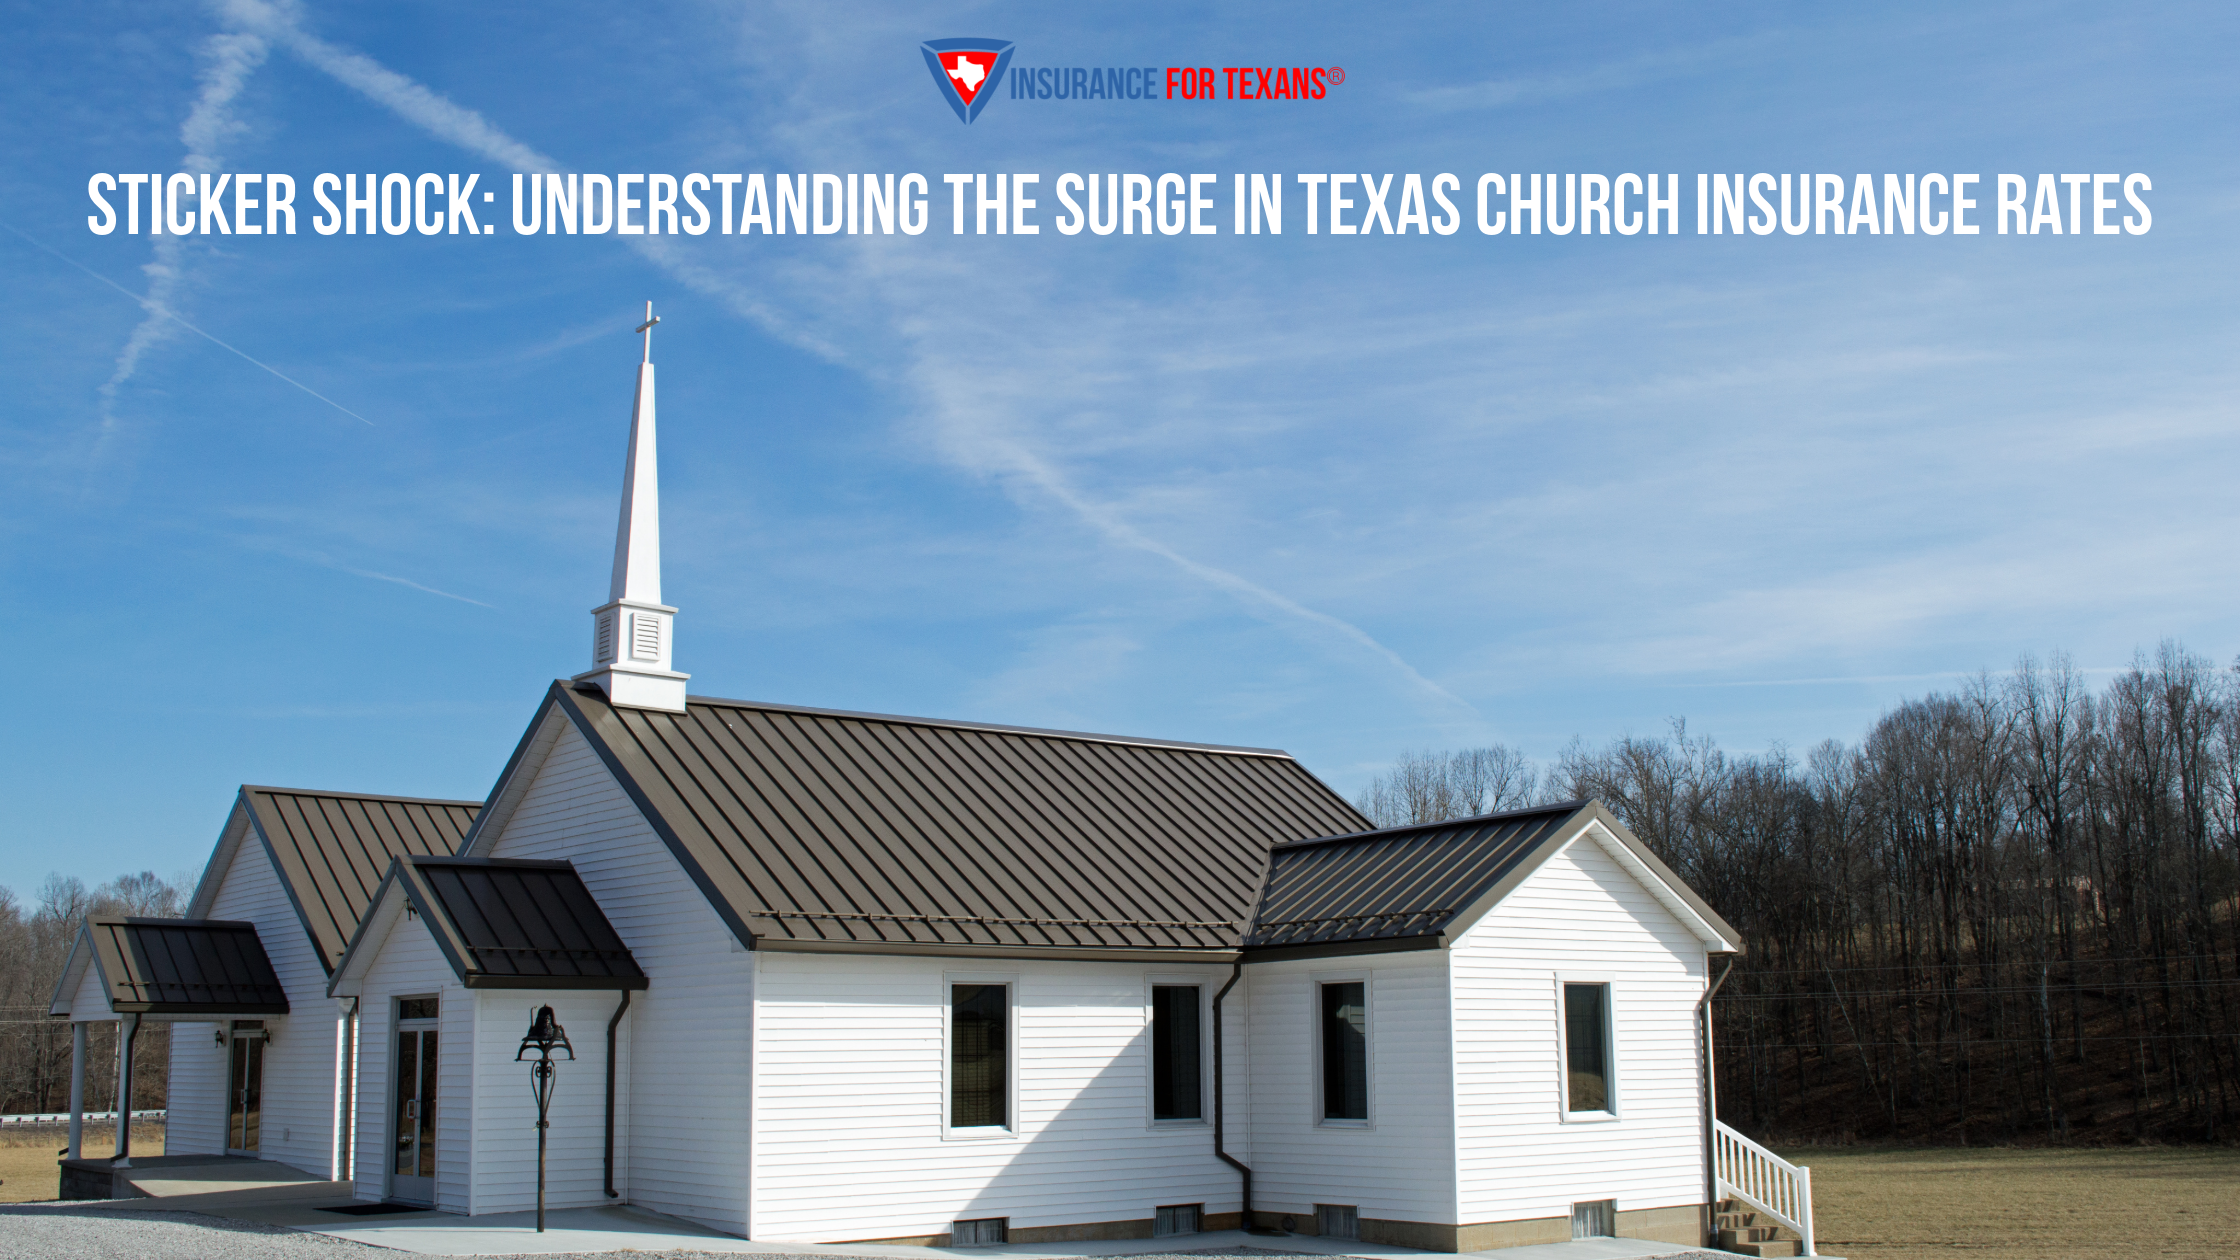 Sticker Shock: Understanding the Surge in Texas Church Insurance Rates